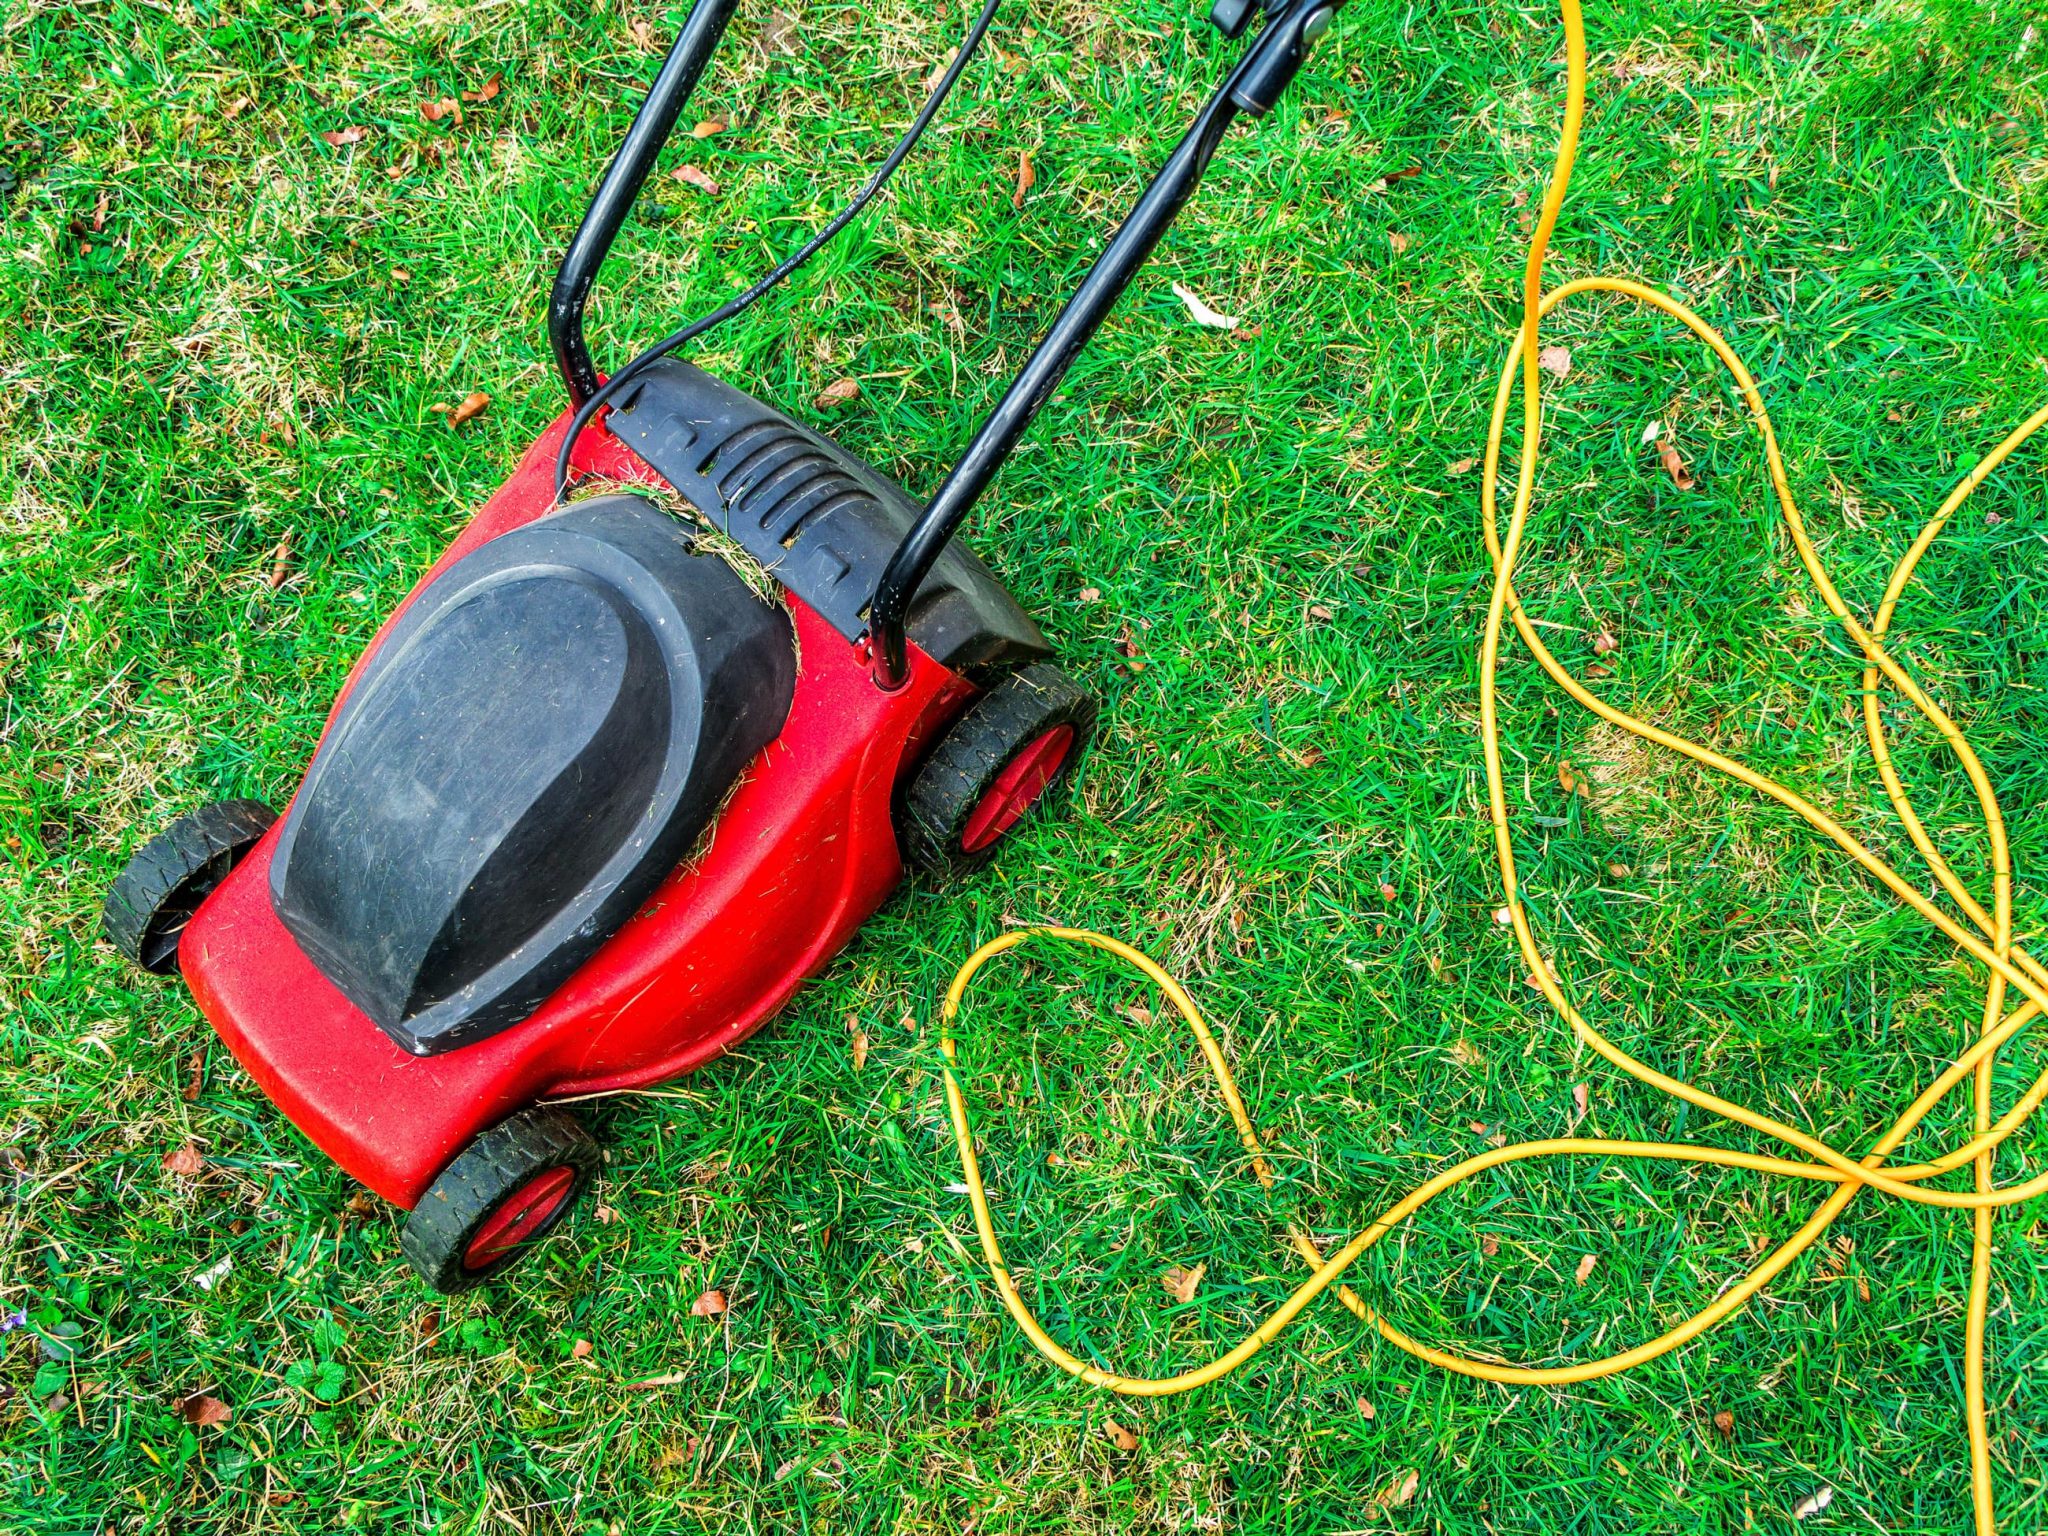 7 Best Lawn Mowers Under 100 For Small Gardens